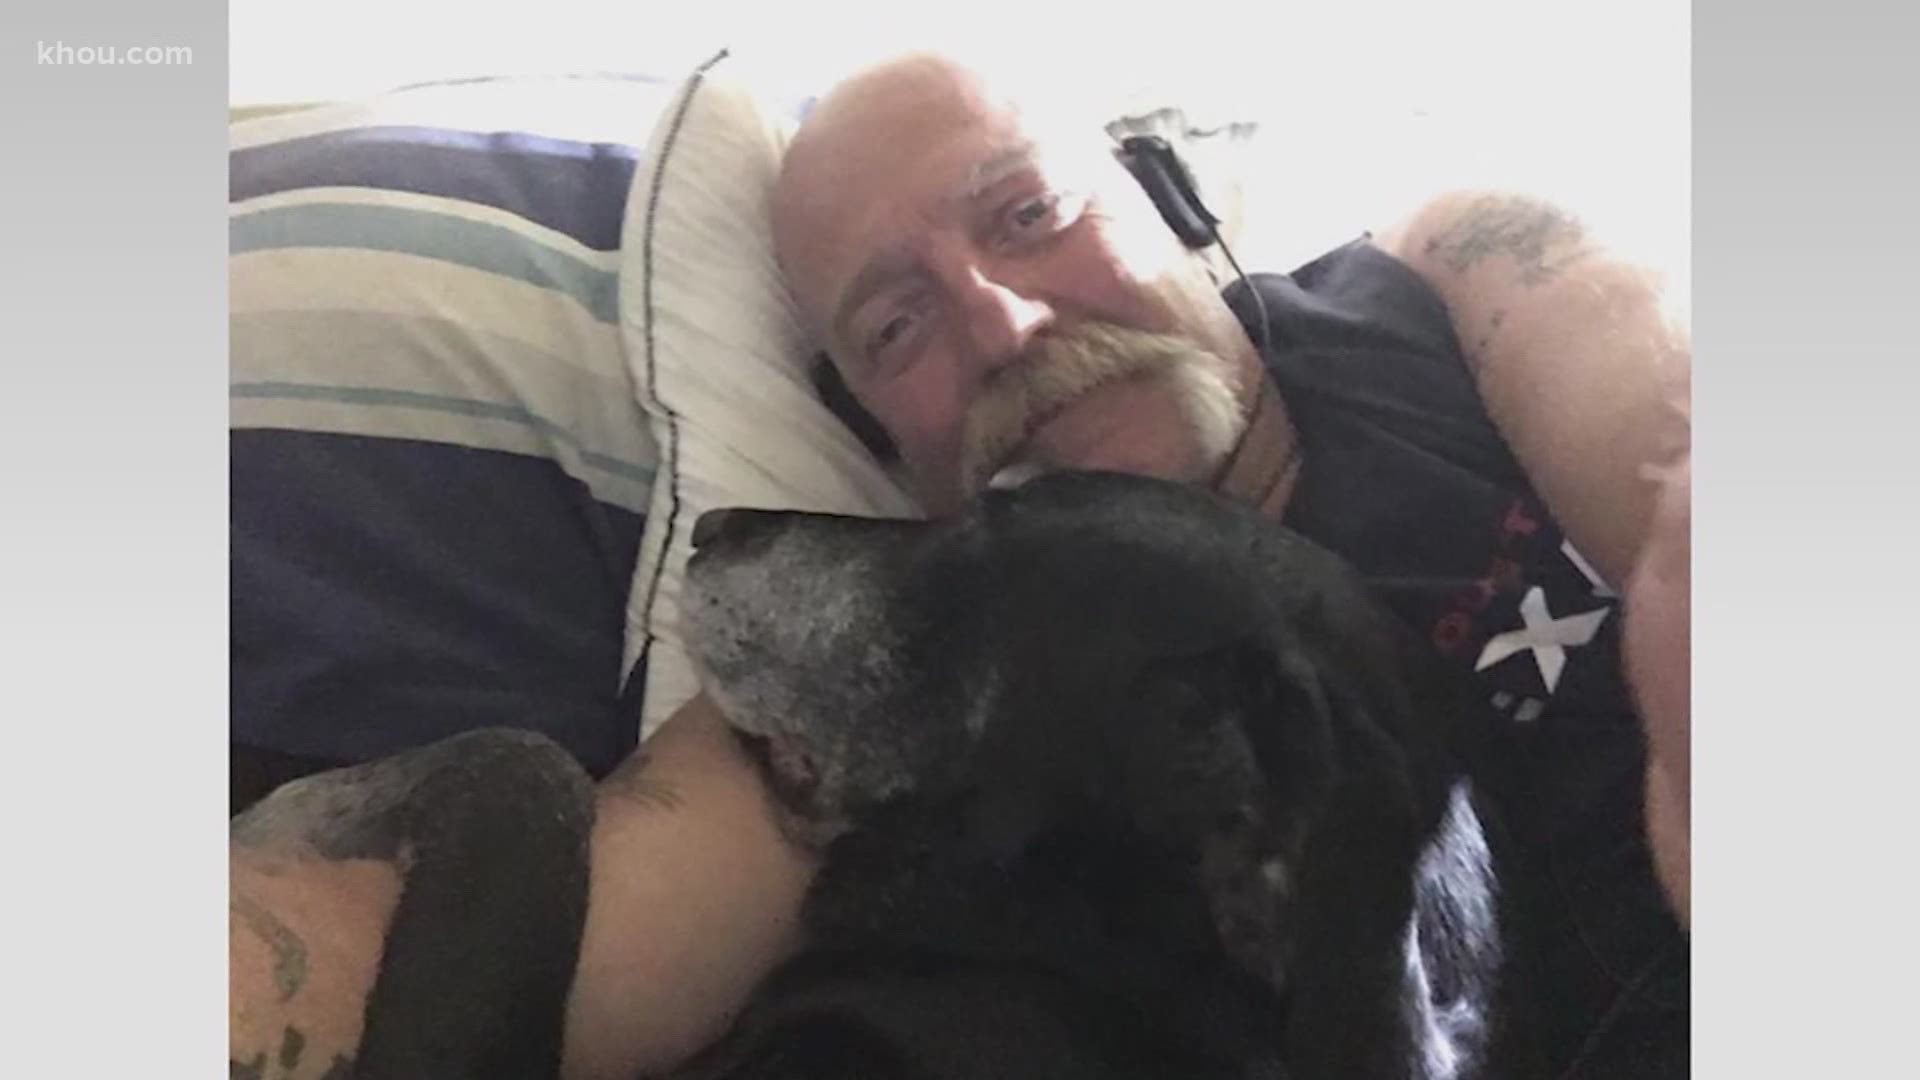 A Pearland man wants to say thank you to a stranger who consoled him as he grieved over losing his beloved dog, Gracie.